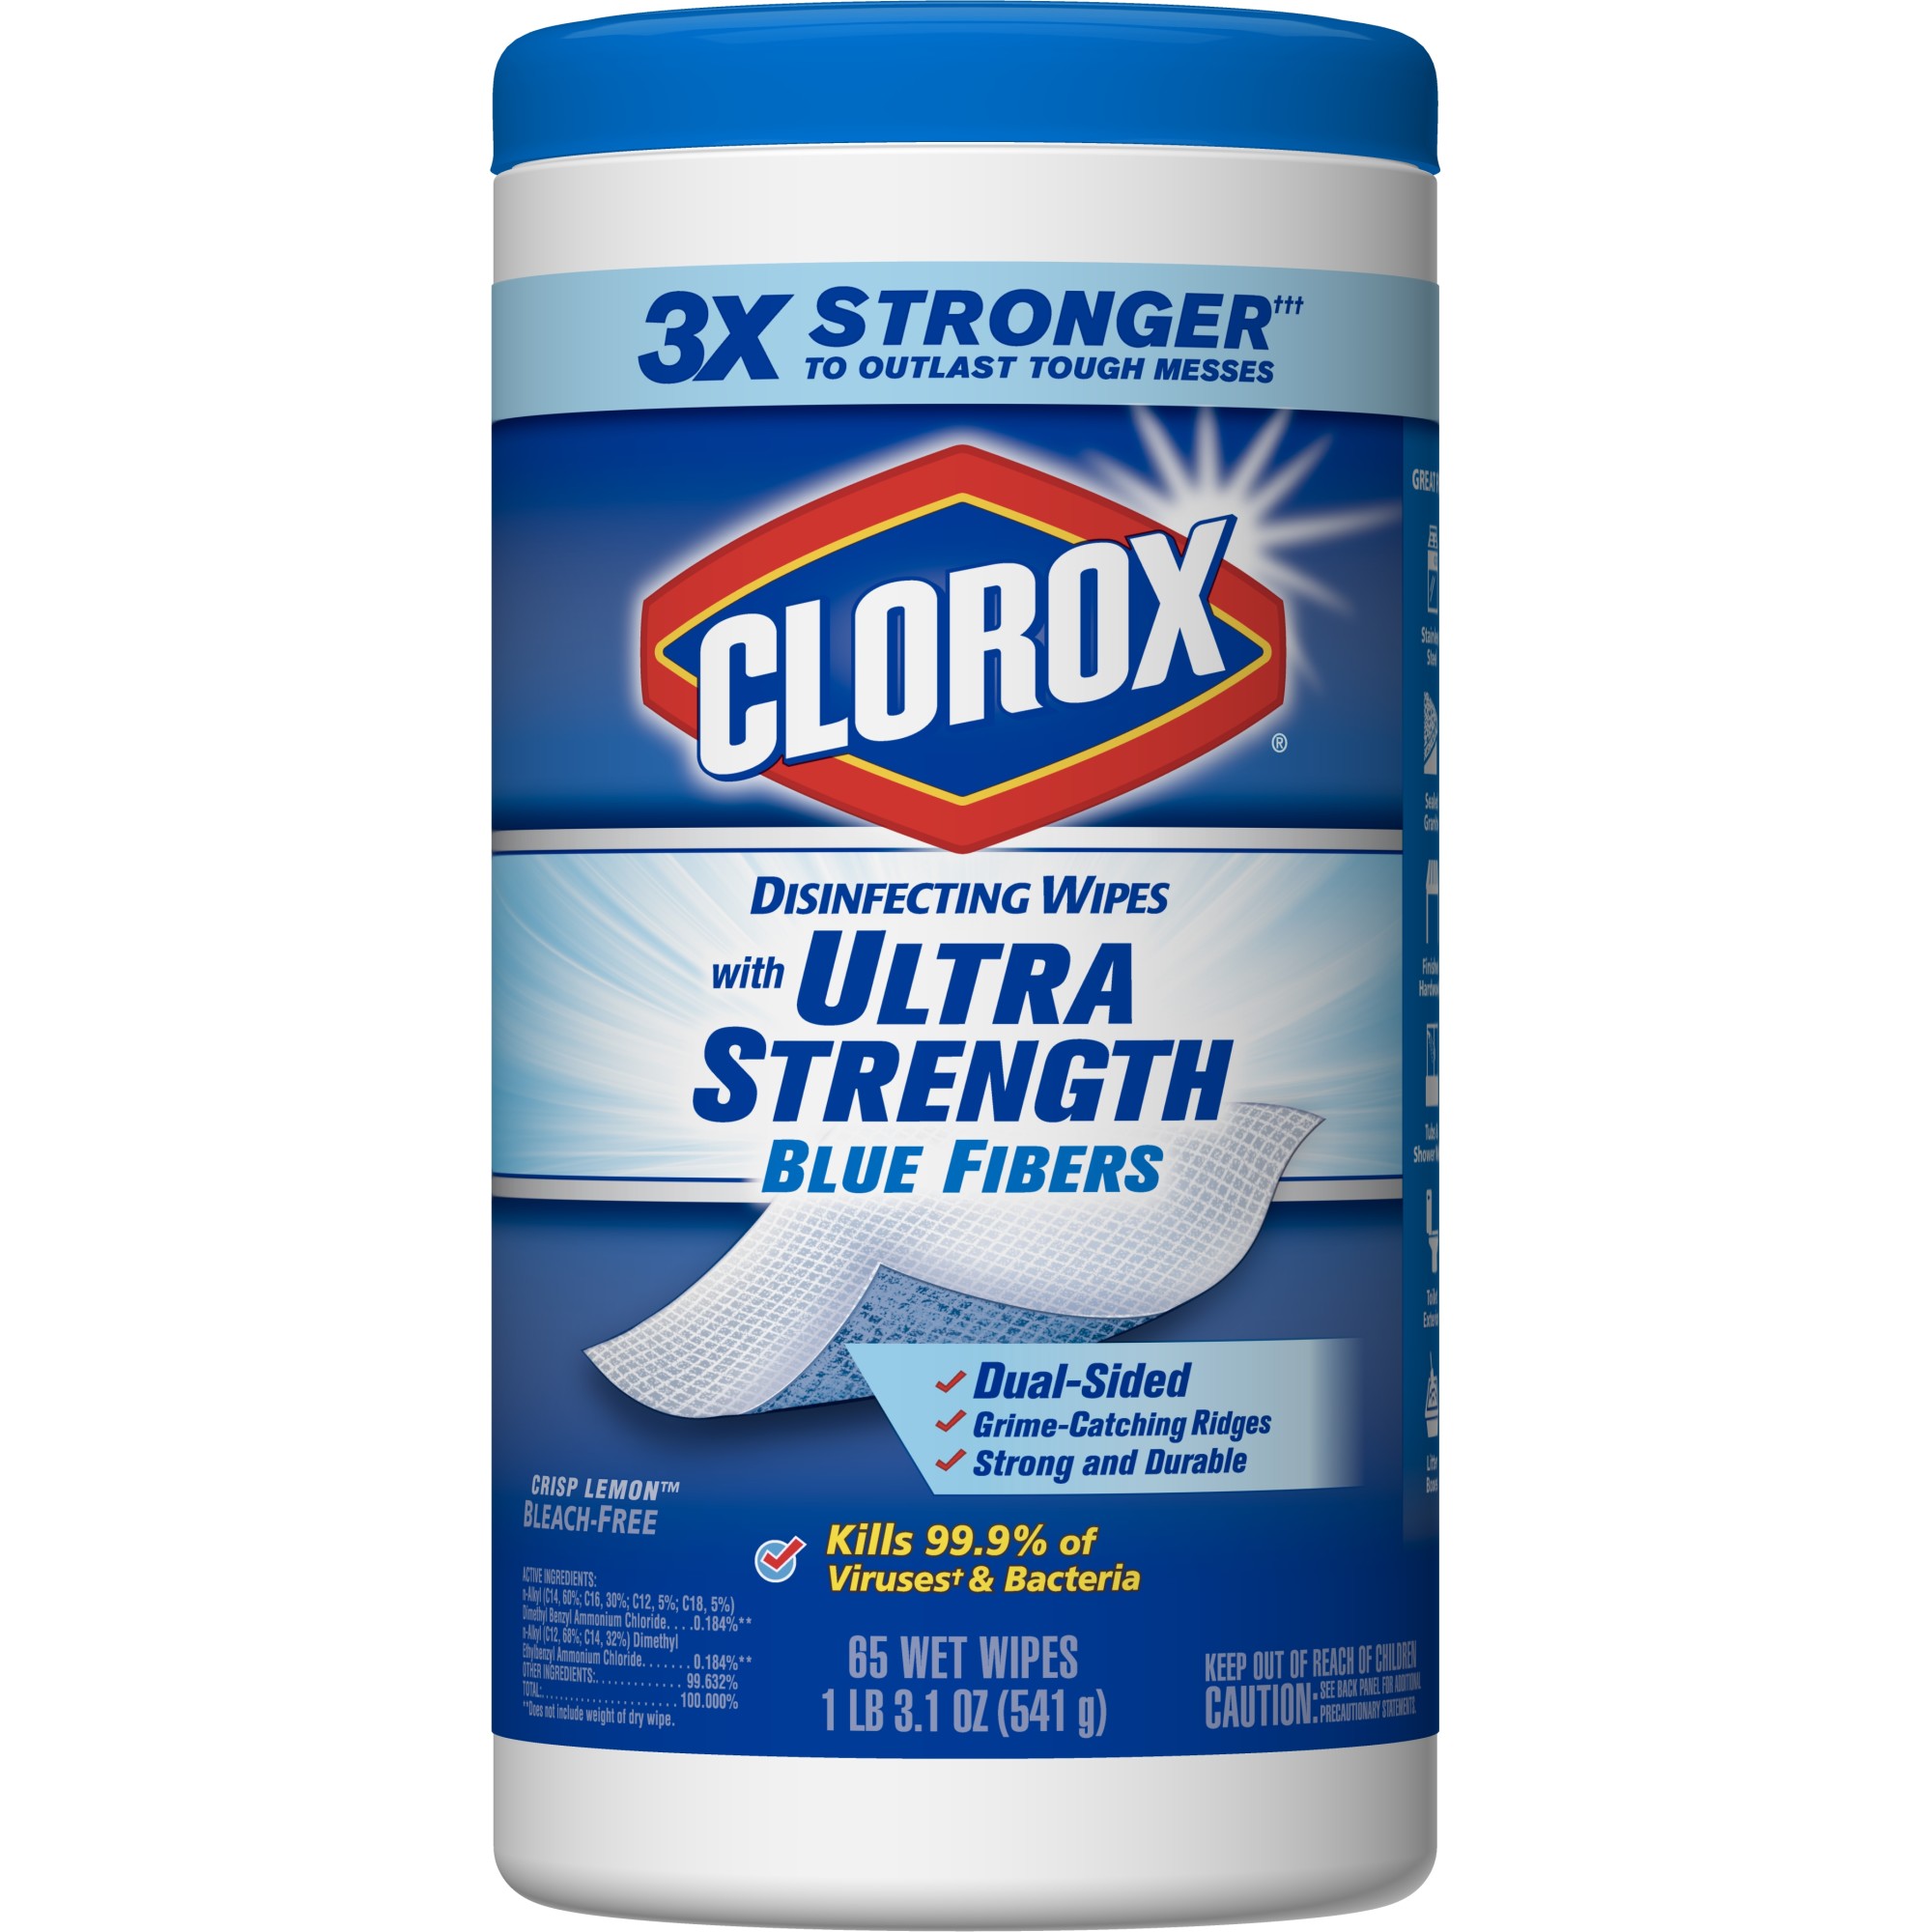 Clorox Disinfecting Wipes with Ultra Strength Blue Fibers, Crisp Lemon - 1 Canister - 65 Wipes - image 1 of 7